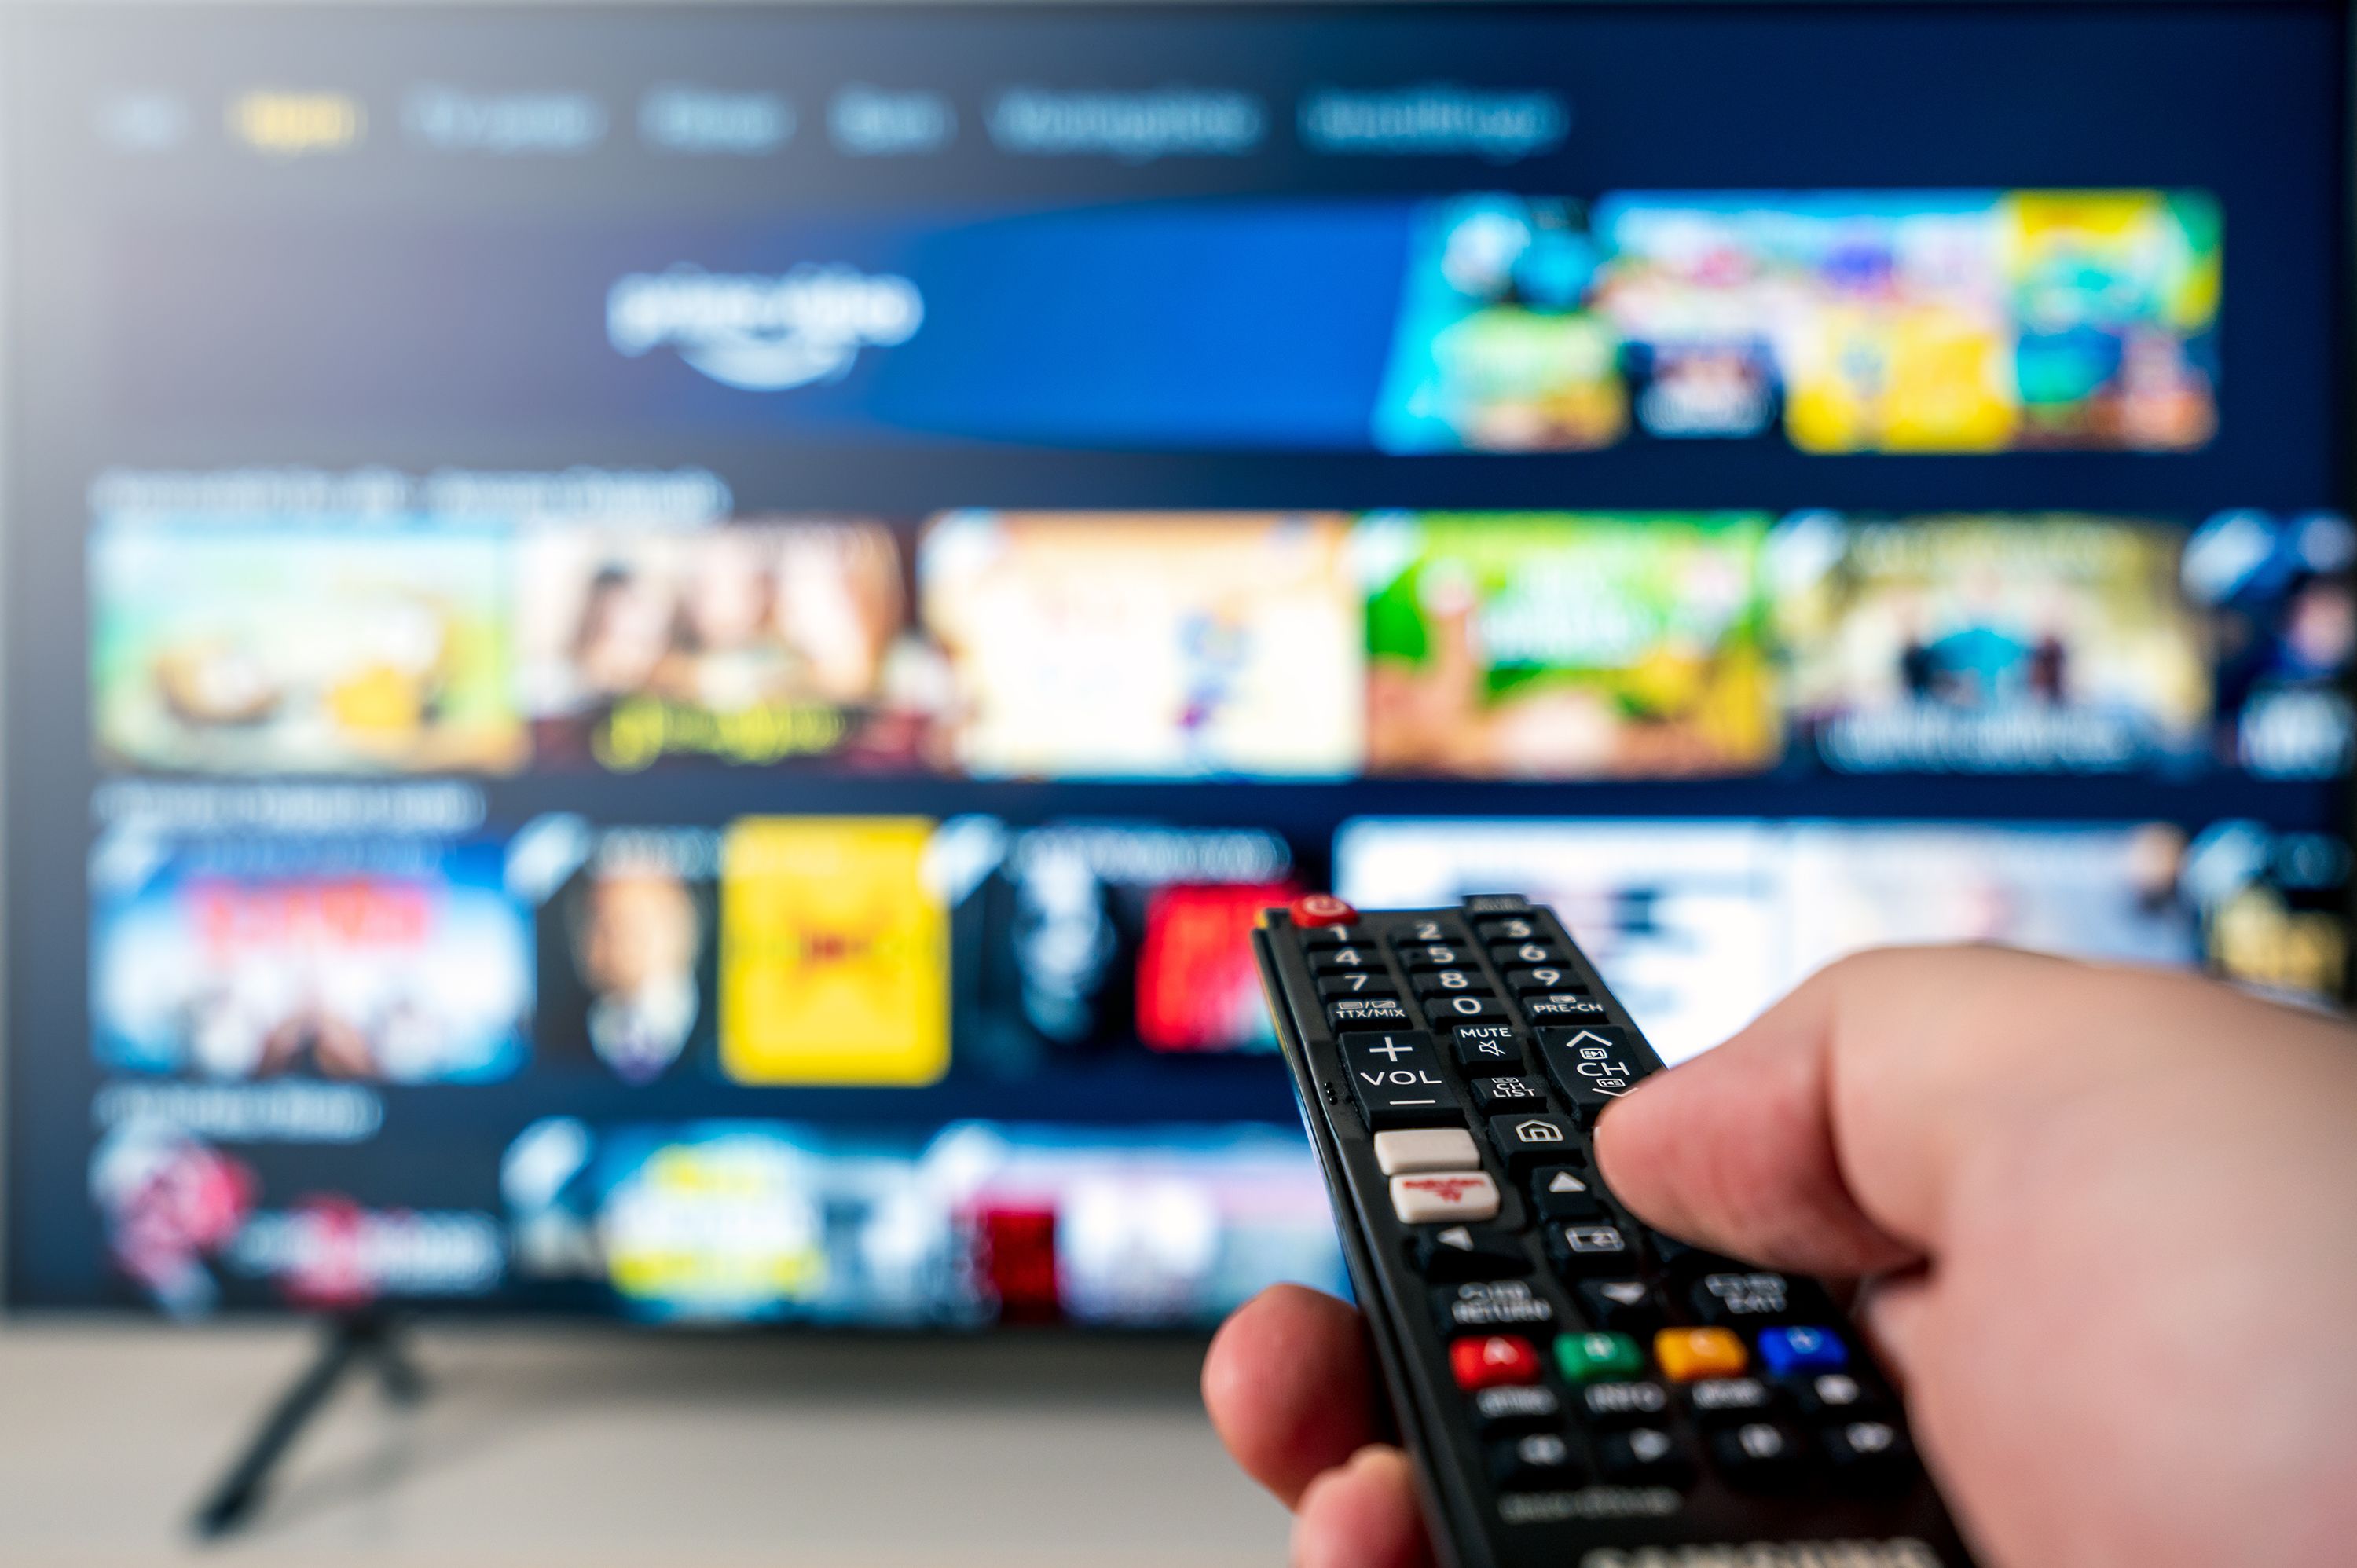 Streaming viewership surpasses cable TV for first time